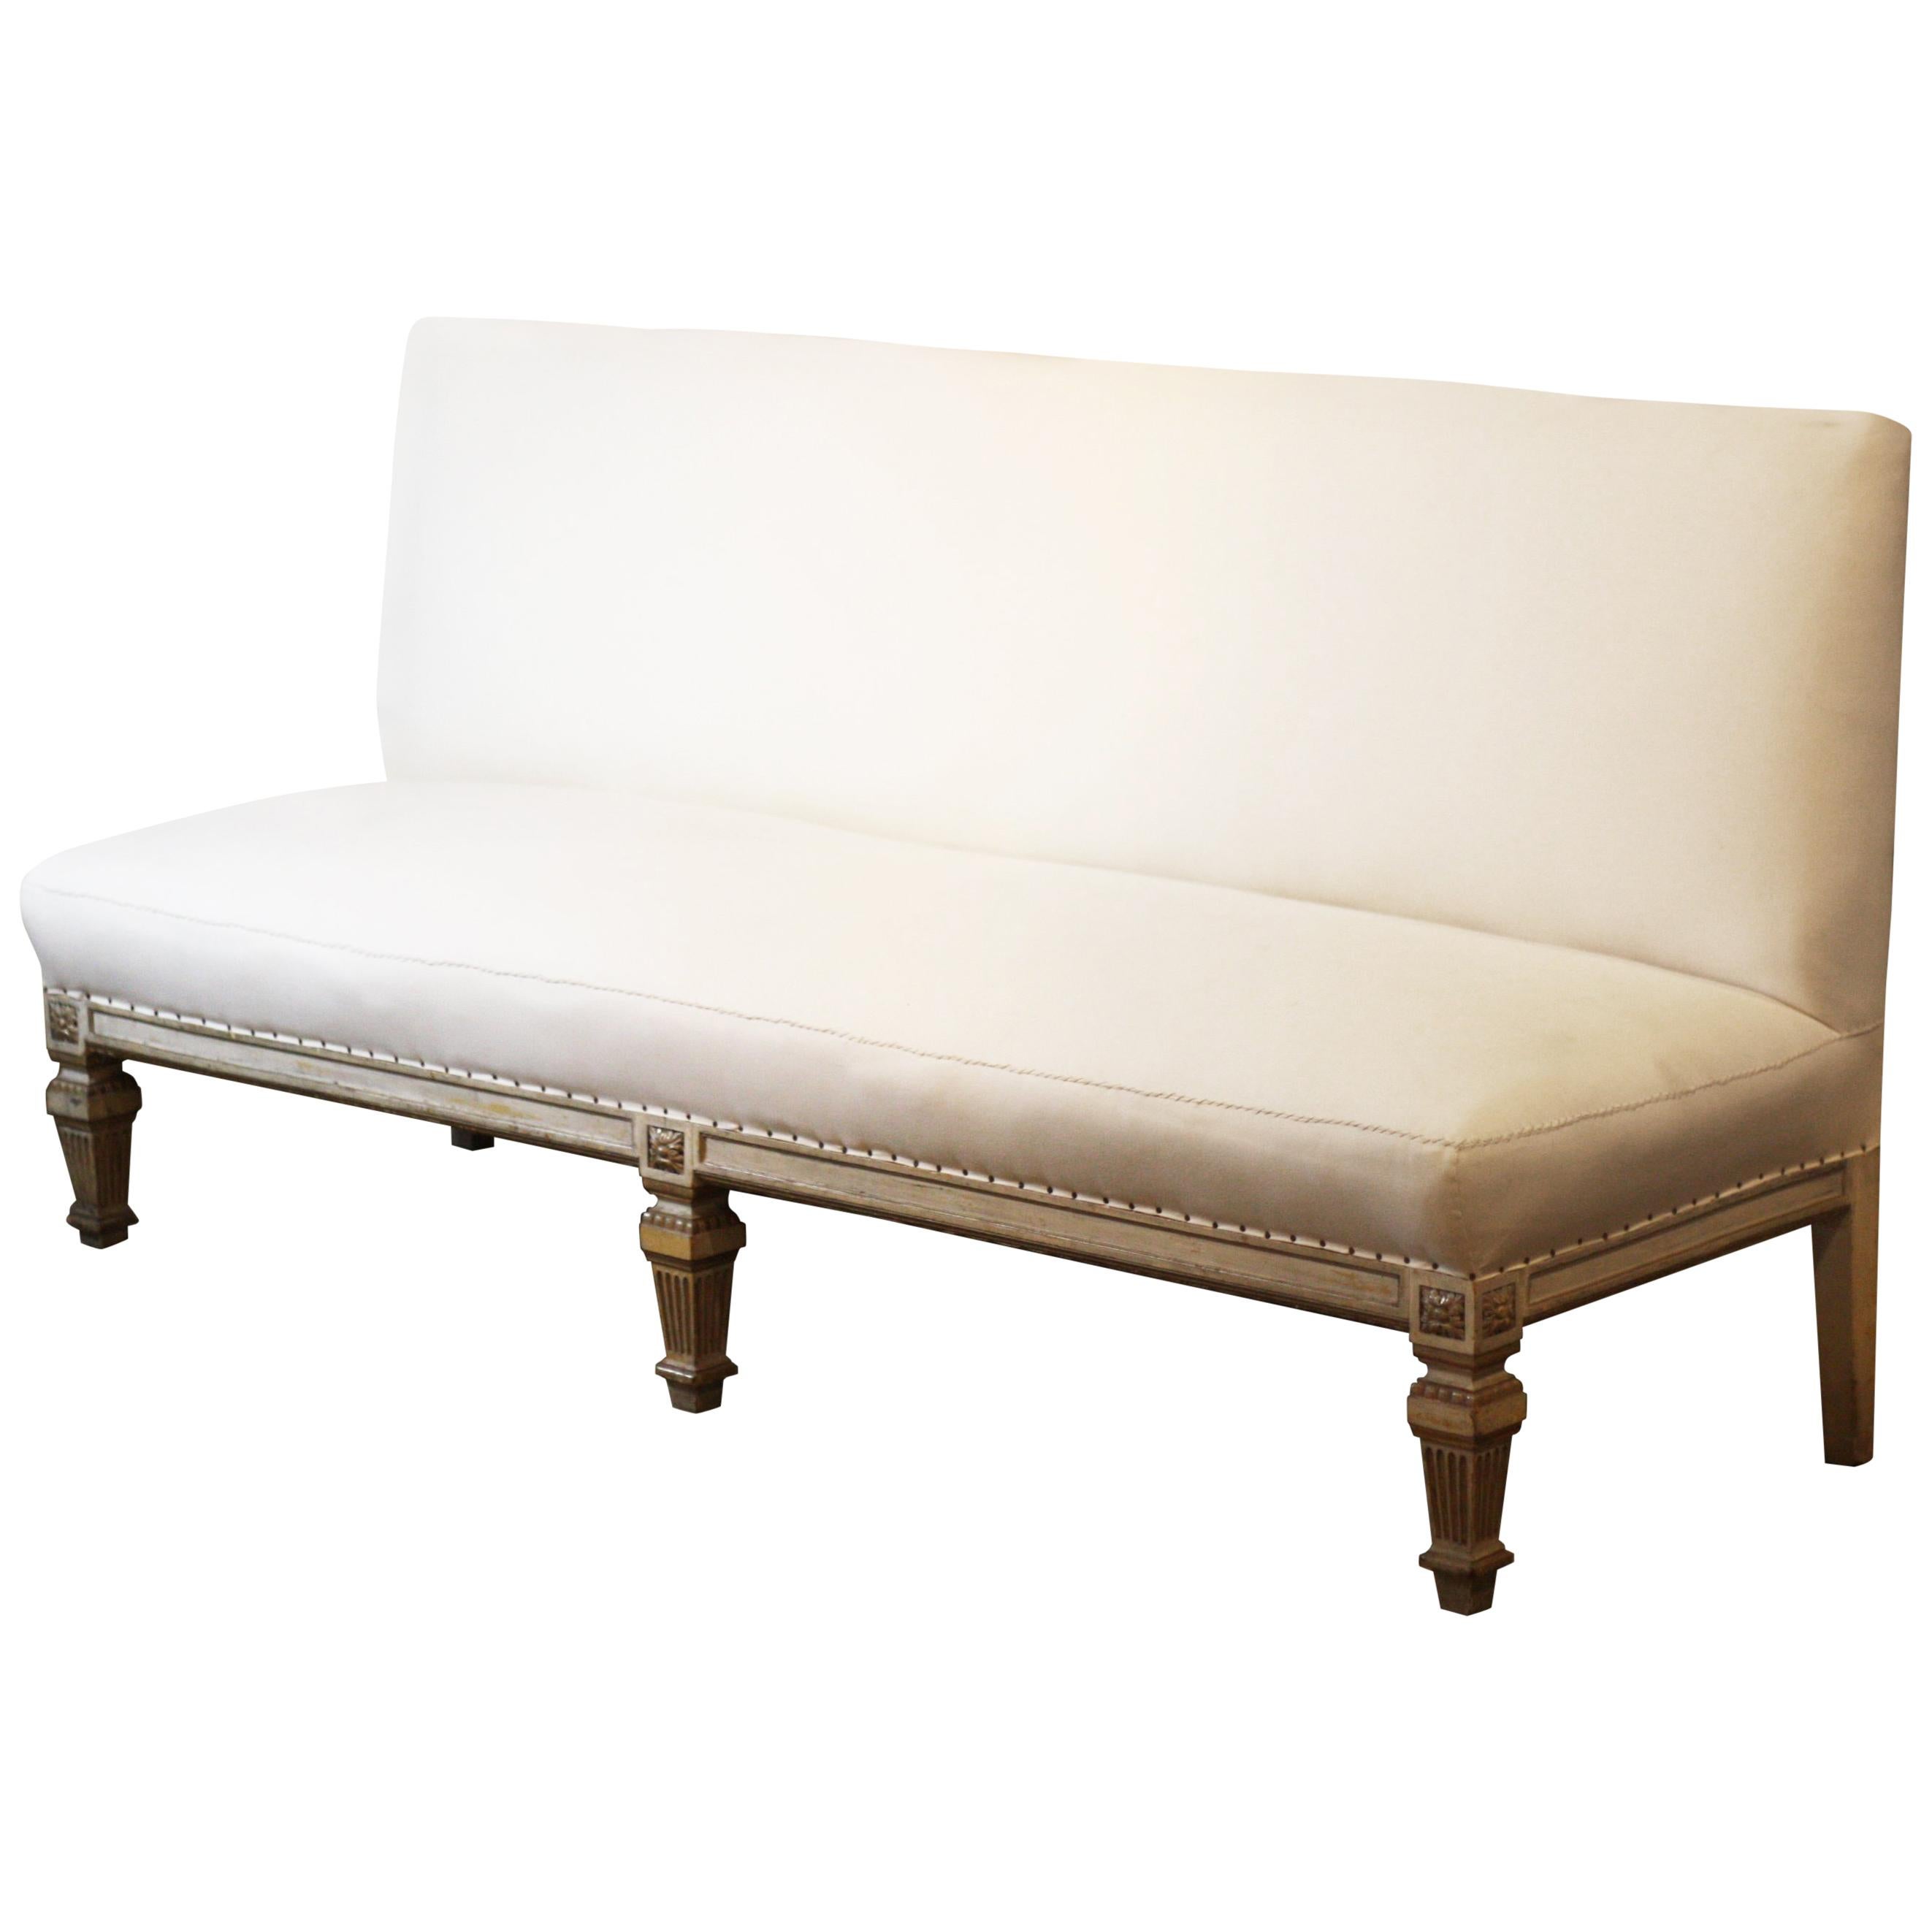 Pair of Giltwood Louis XVI Banquette Canapes or Sofas